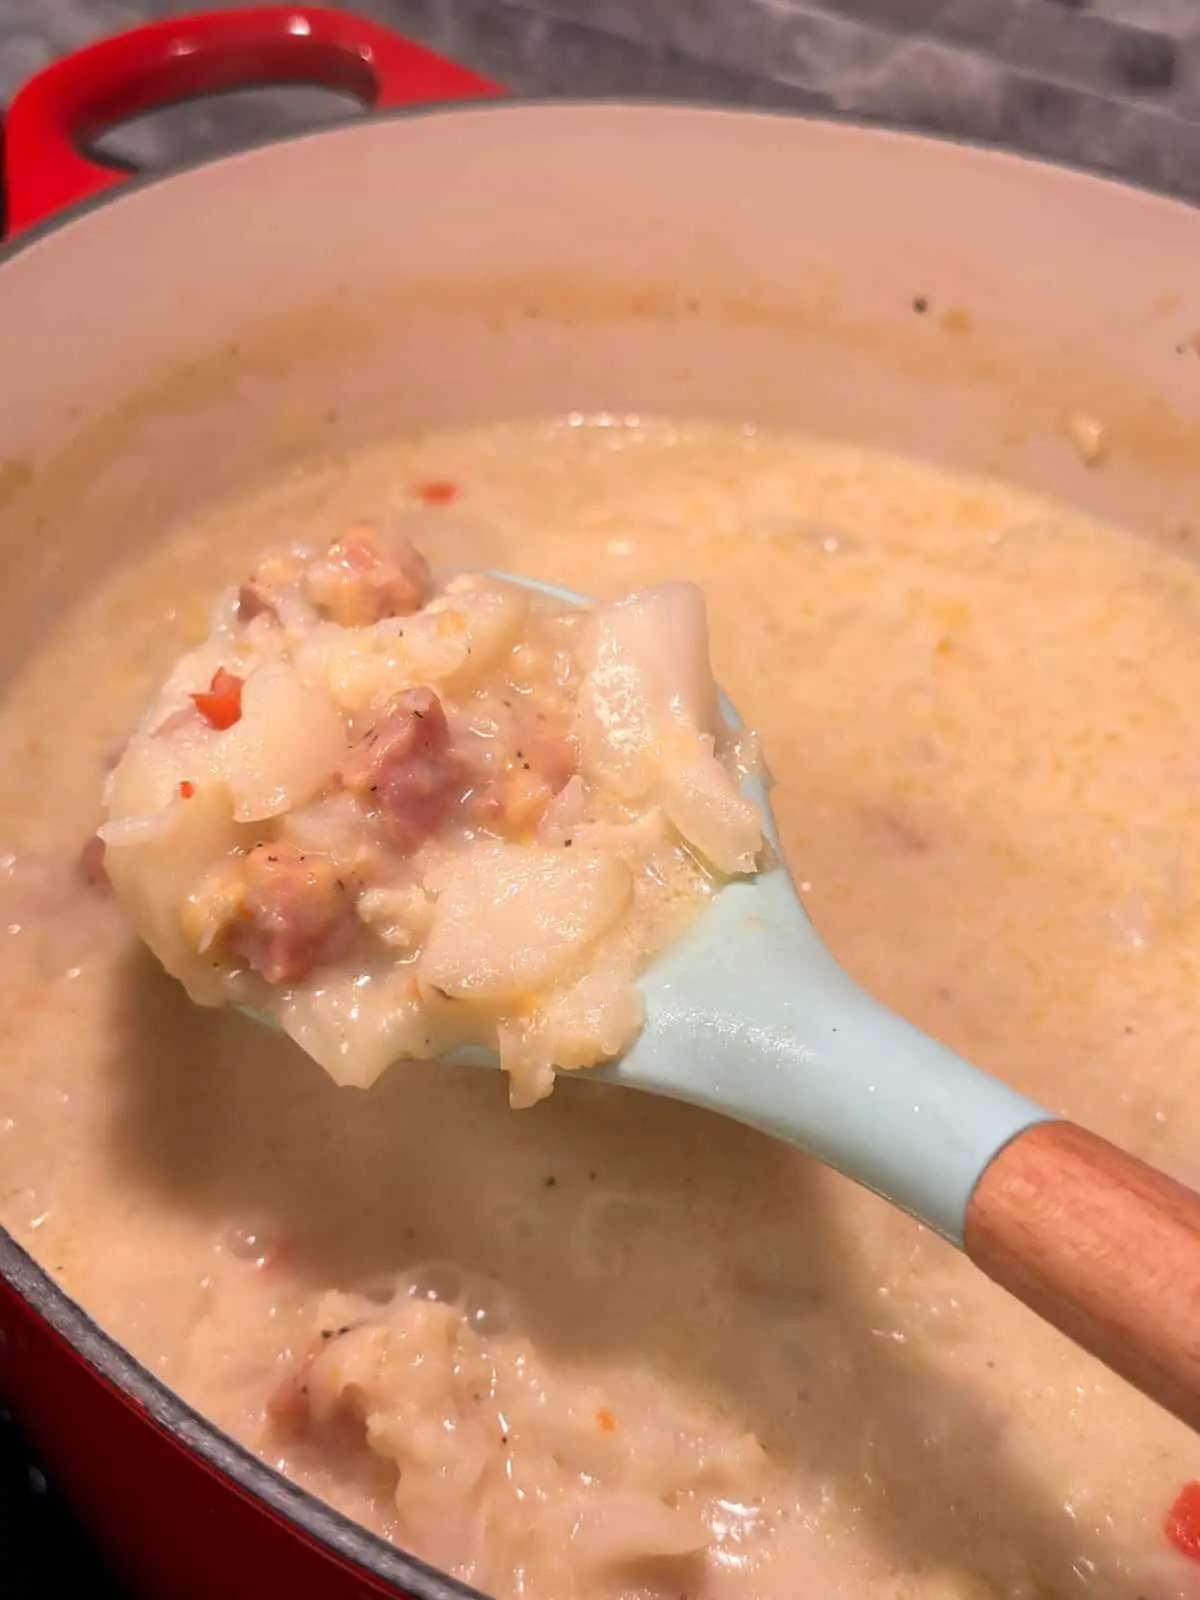 A red dutch oven containing a creamy cauliflower, potato, and ham soup. A blue silicone spoon with wooden handle contains some of the soup in the foreground.